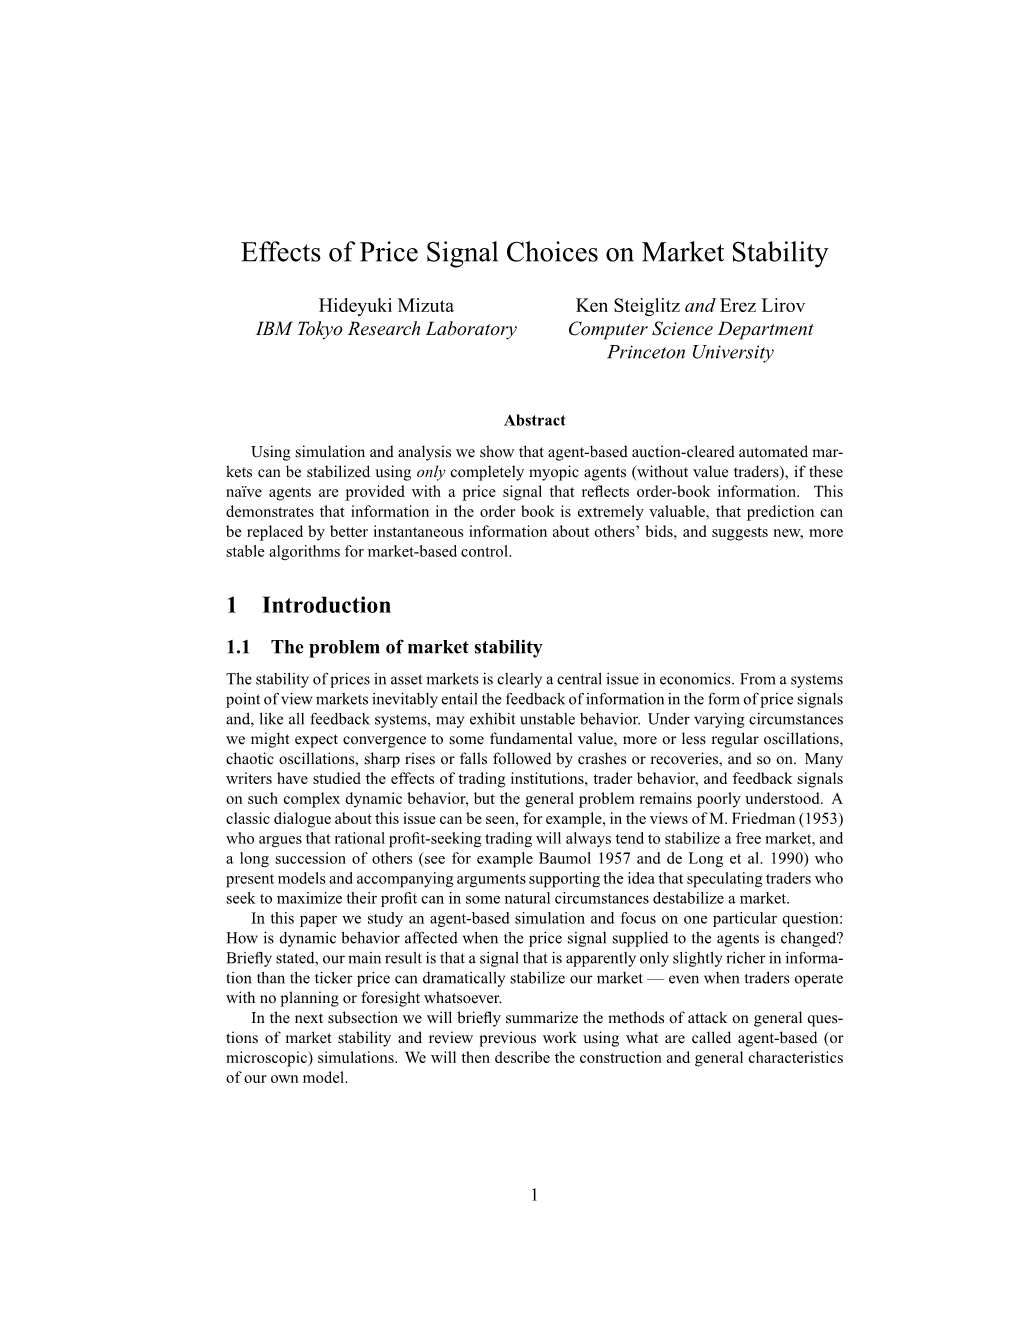 Effects of Price Signal Choices on Market Stability